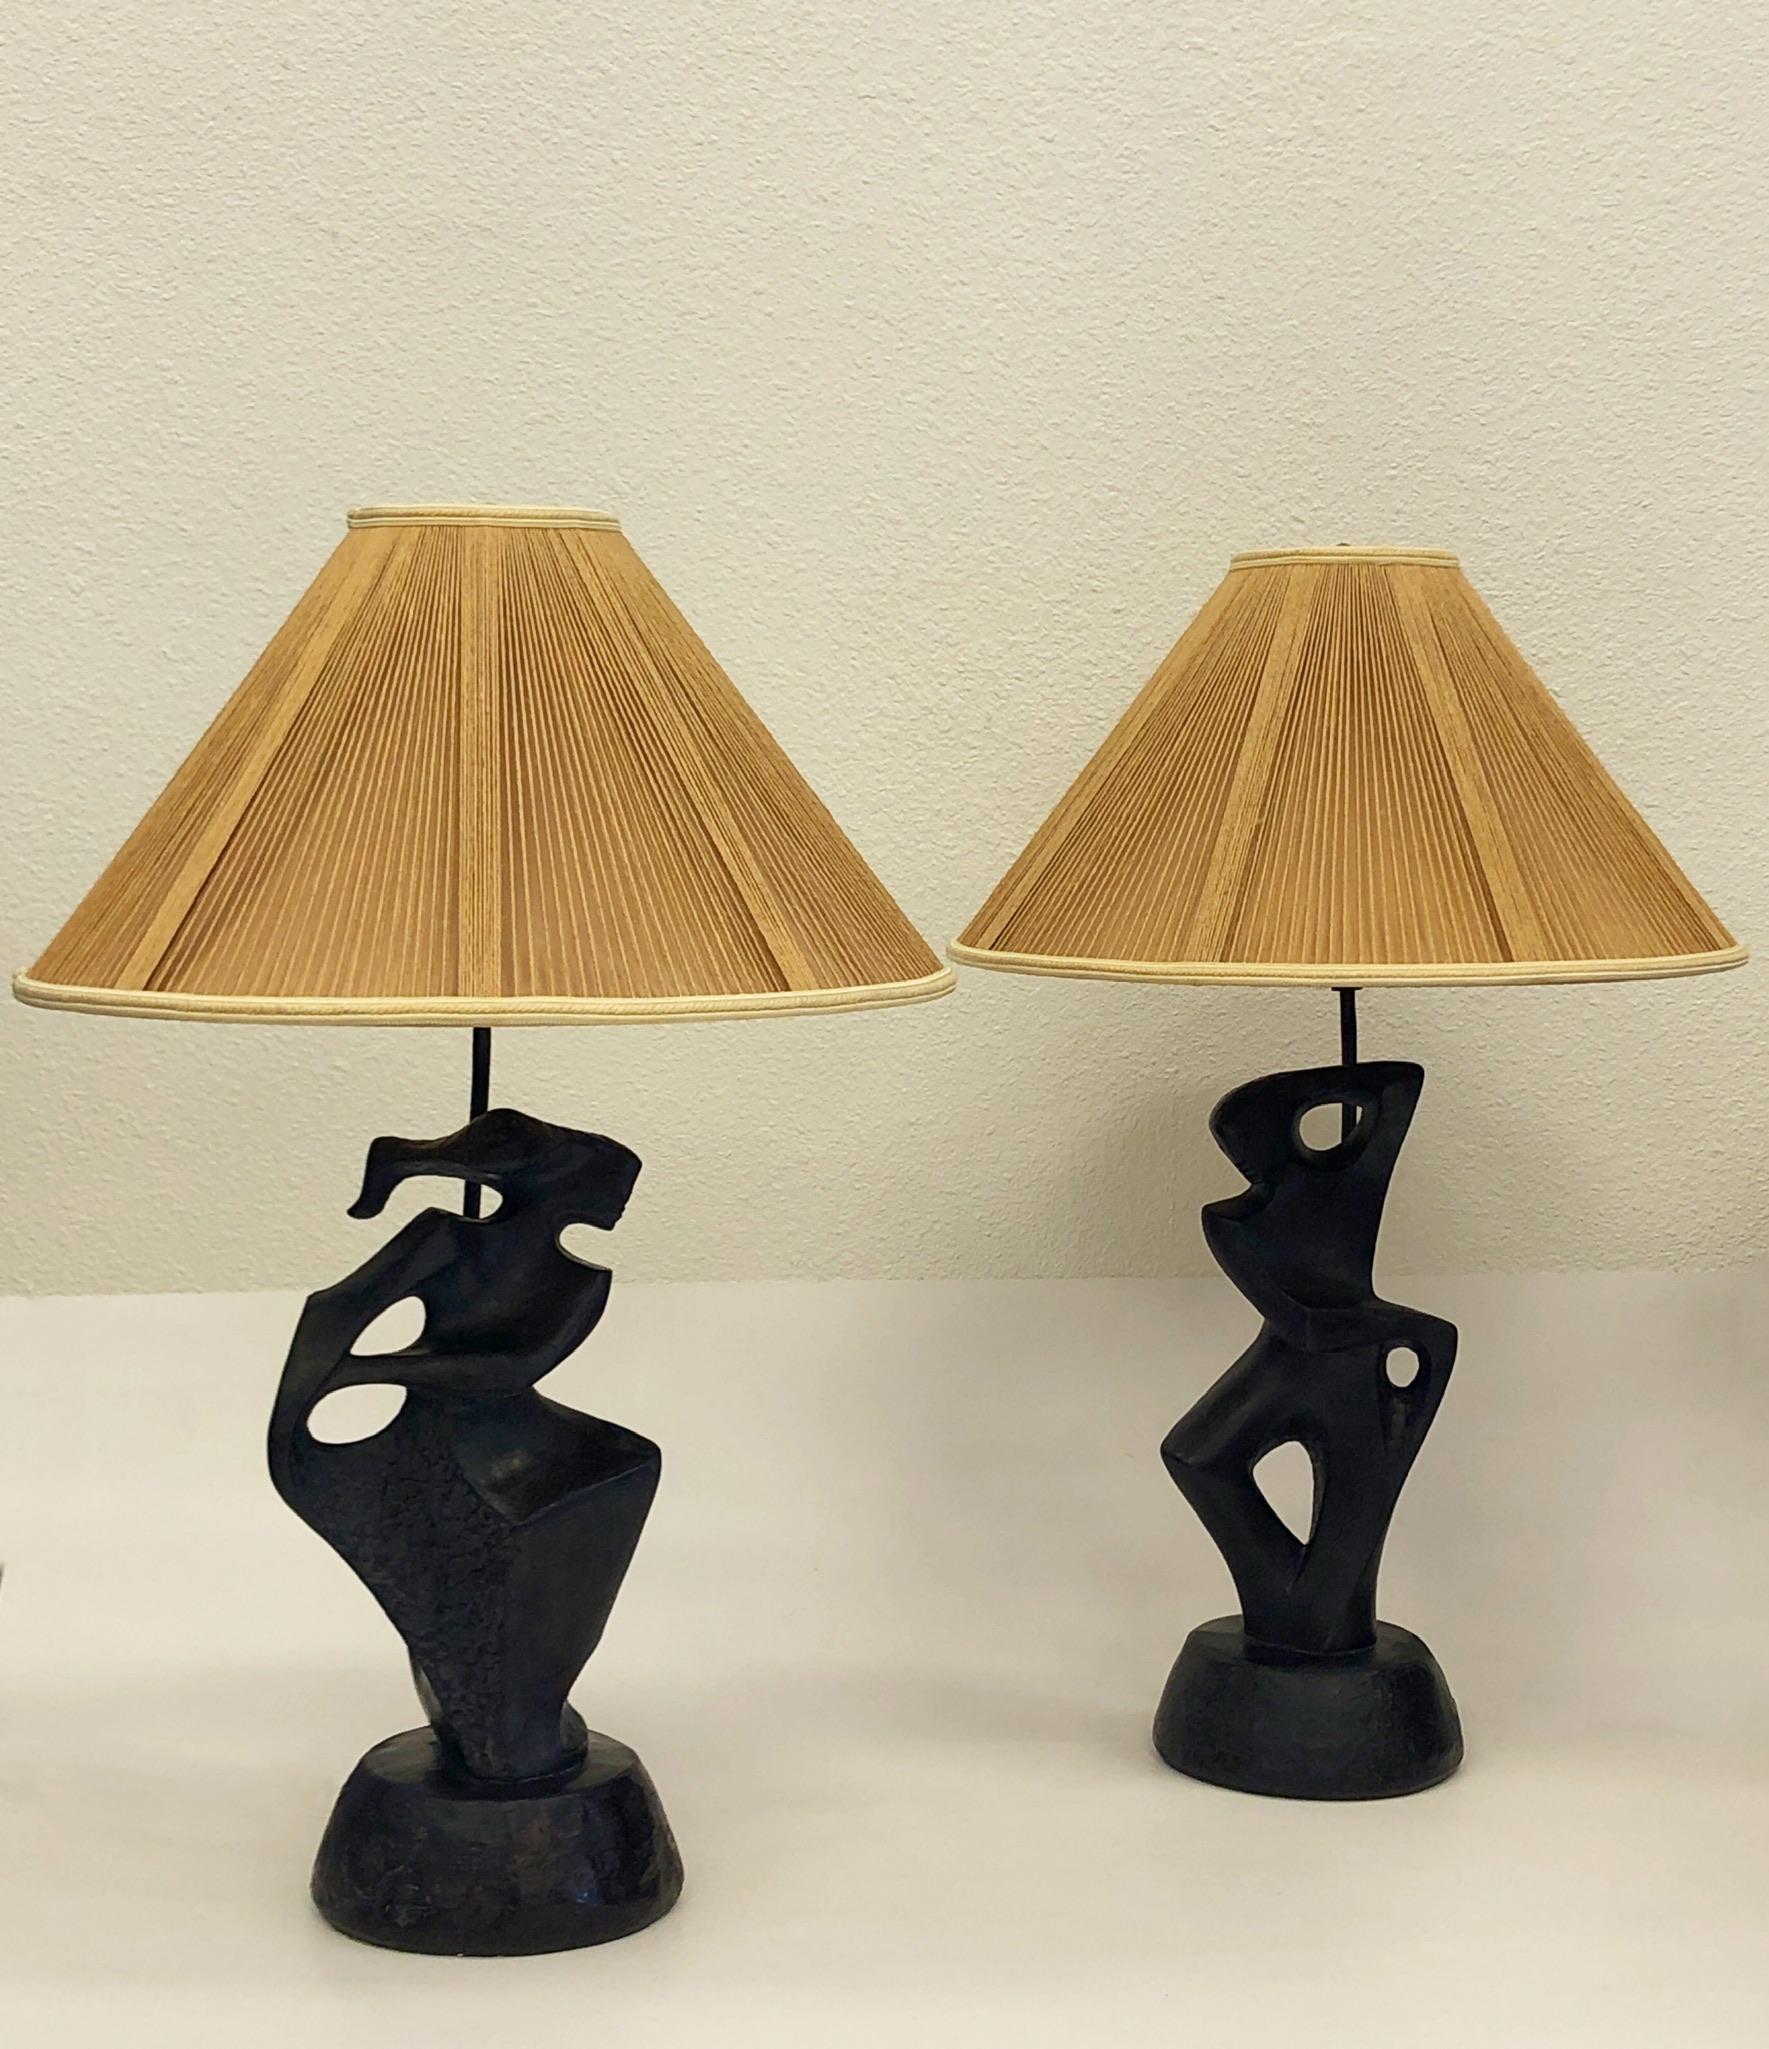 Cast Pair of Black Lacquered Sculptural Table Lamps by Marianna von Allesch for RIMA